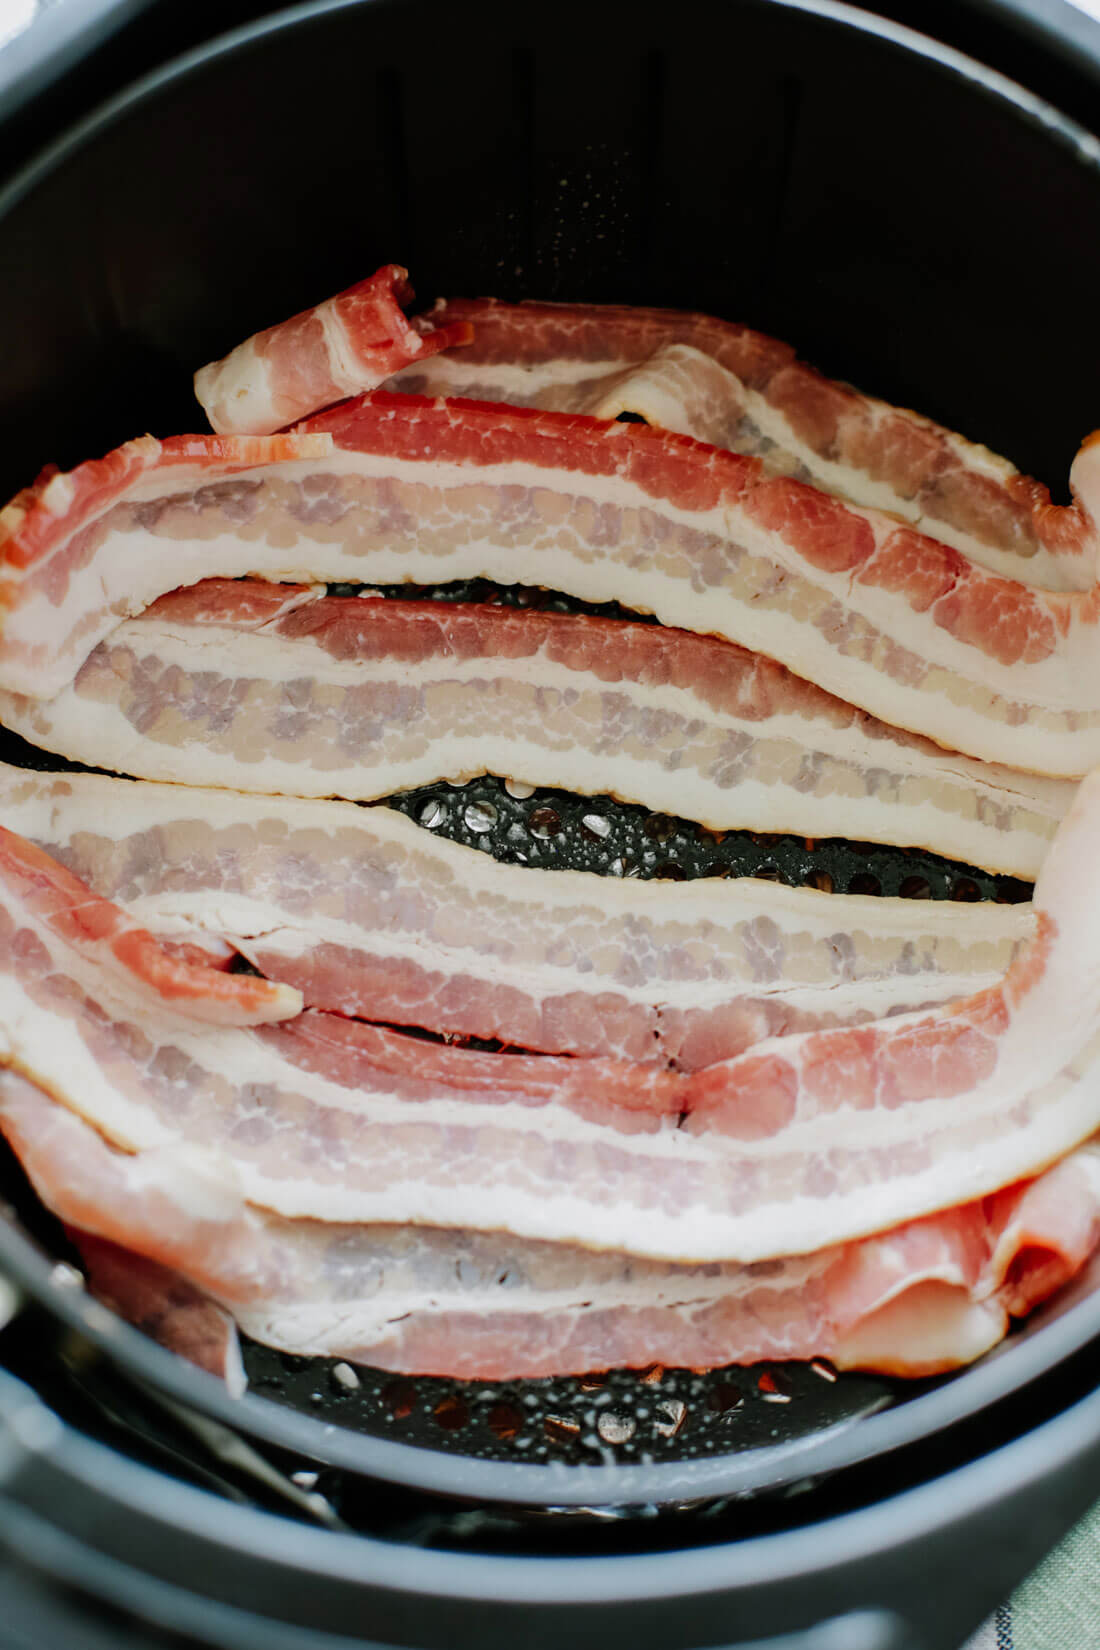 Putting bacon in the air fryer